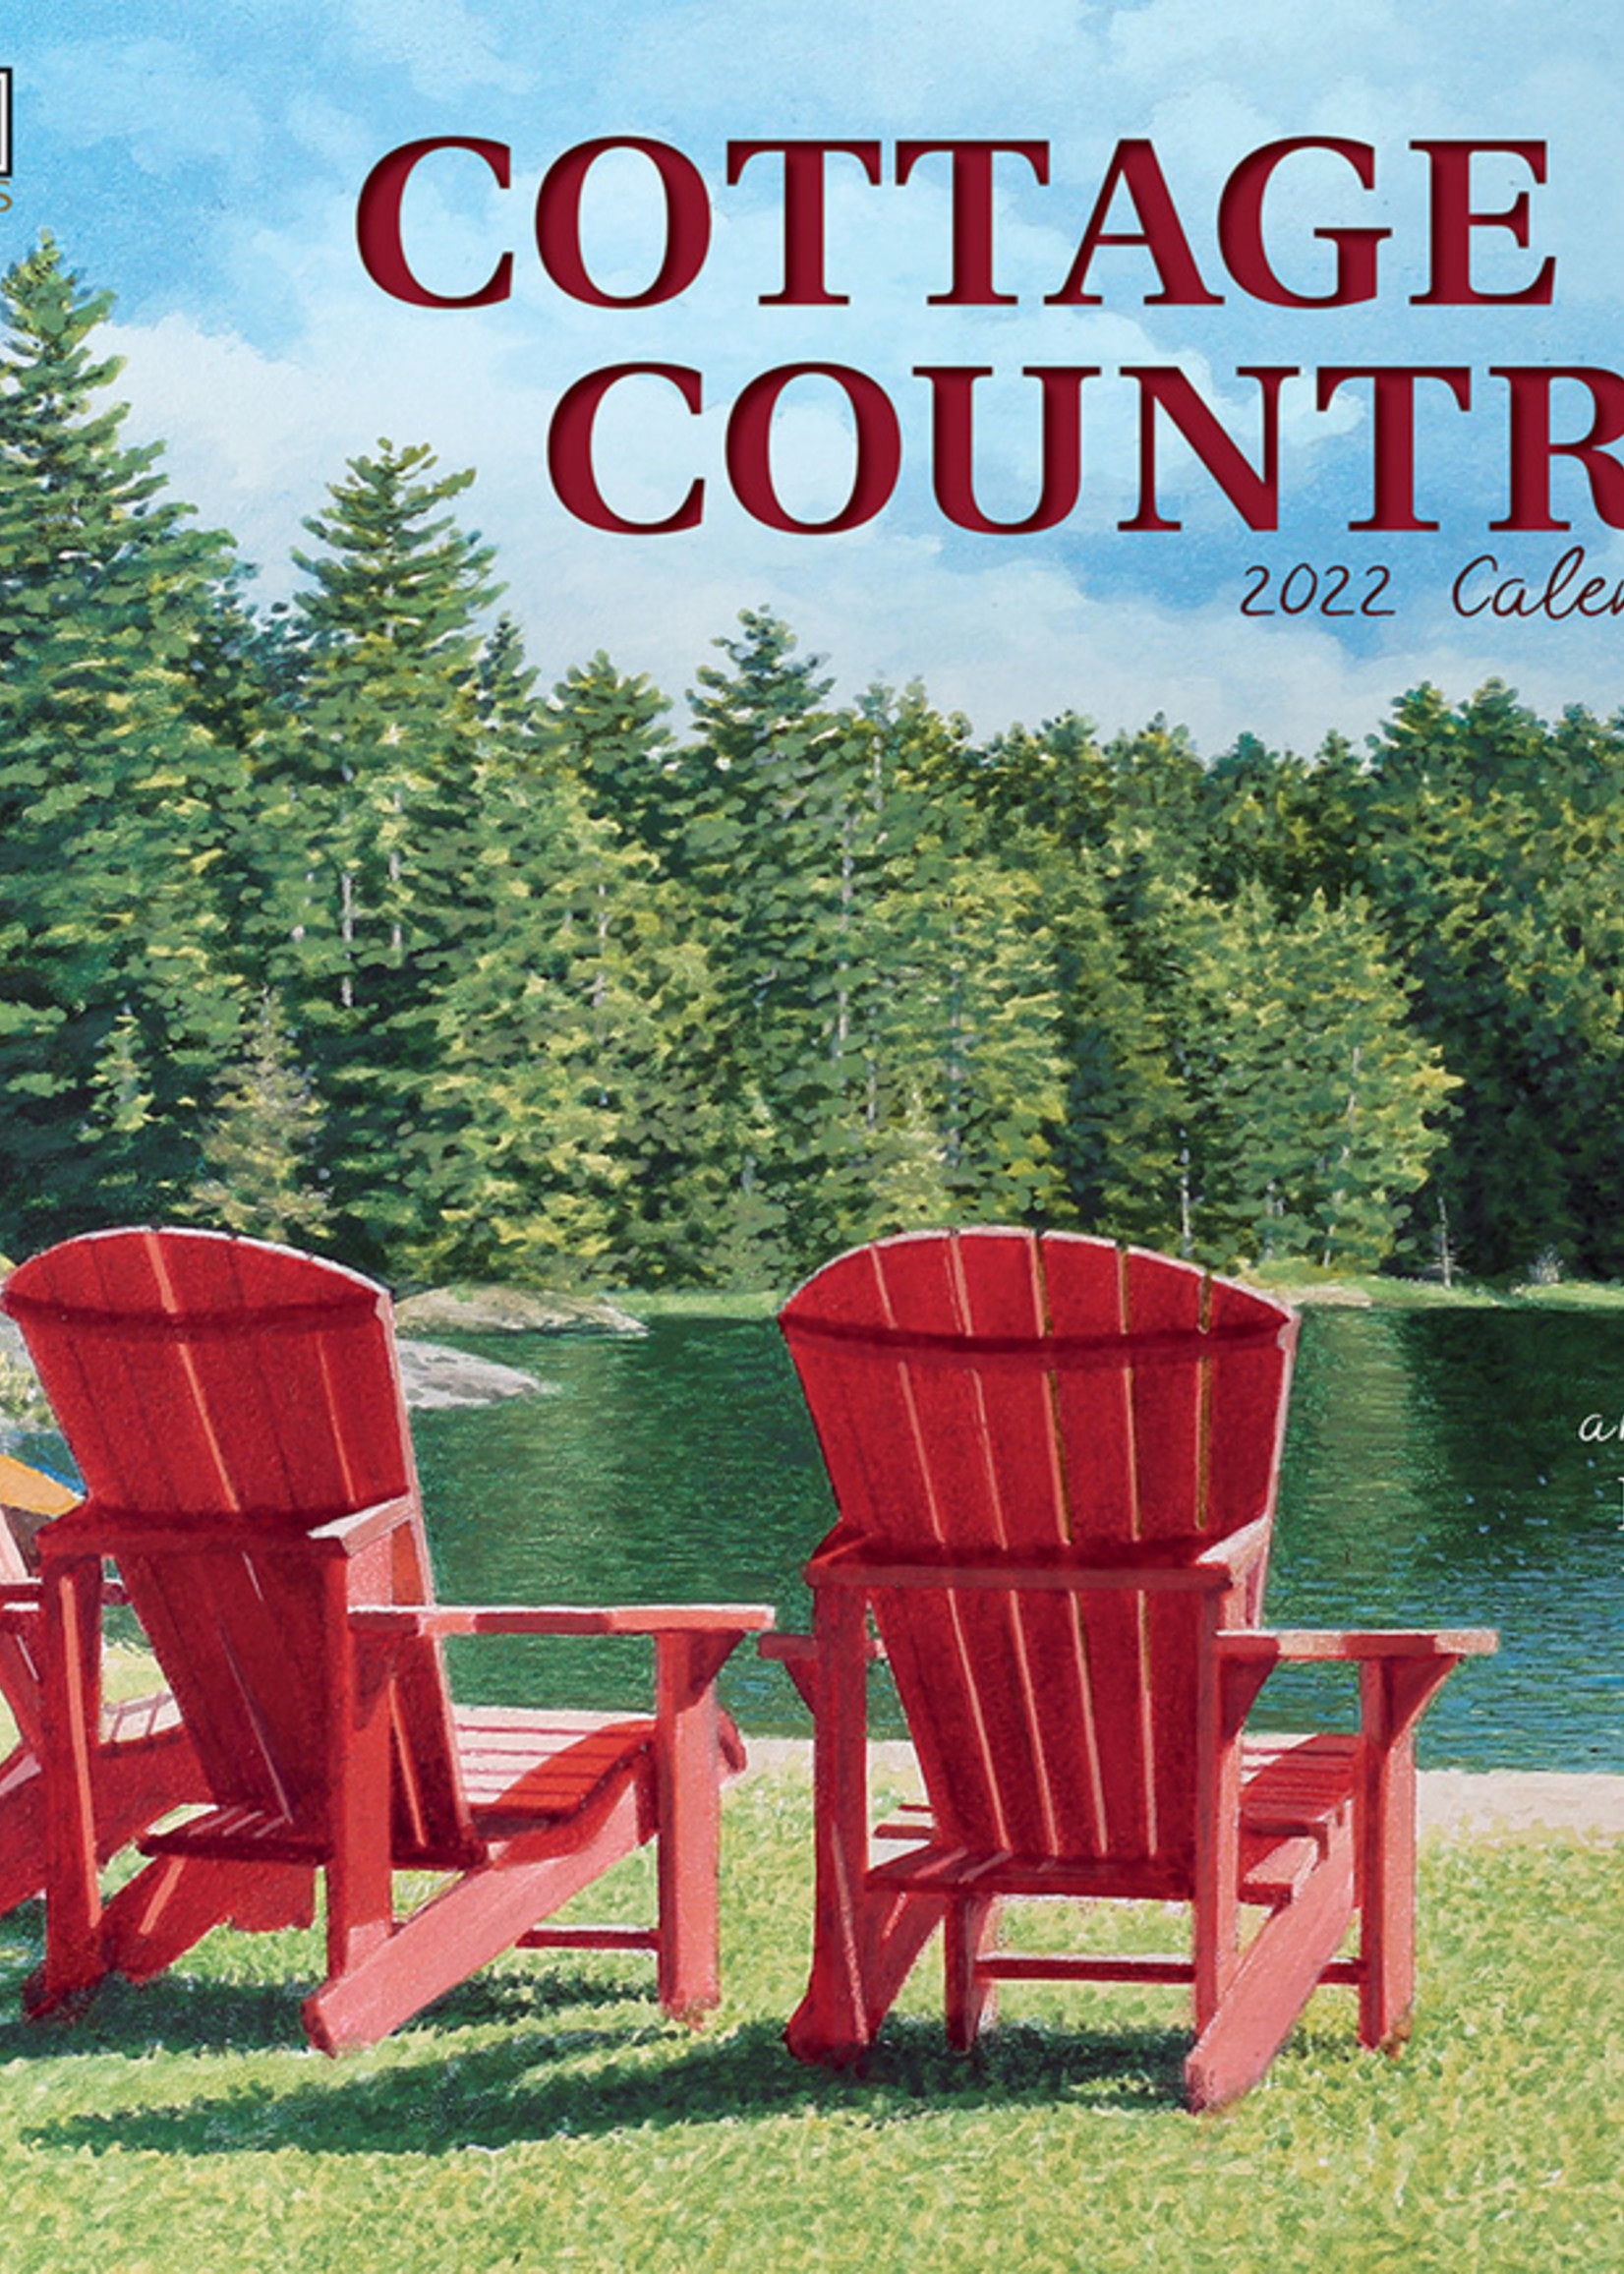 Cottage Country Calendar 2022